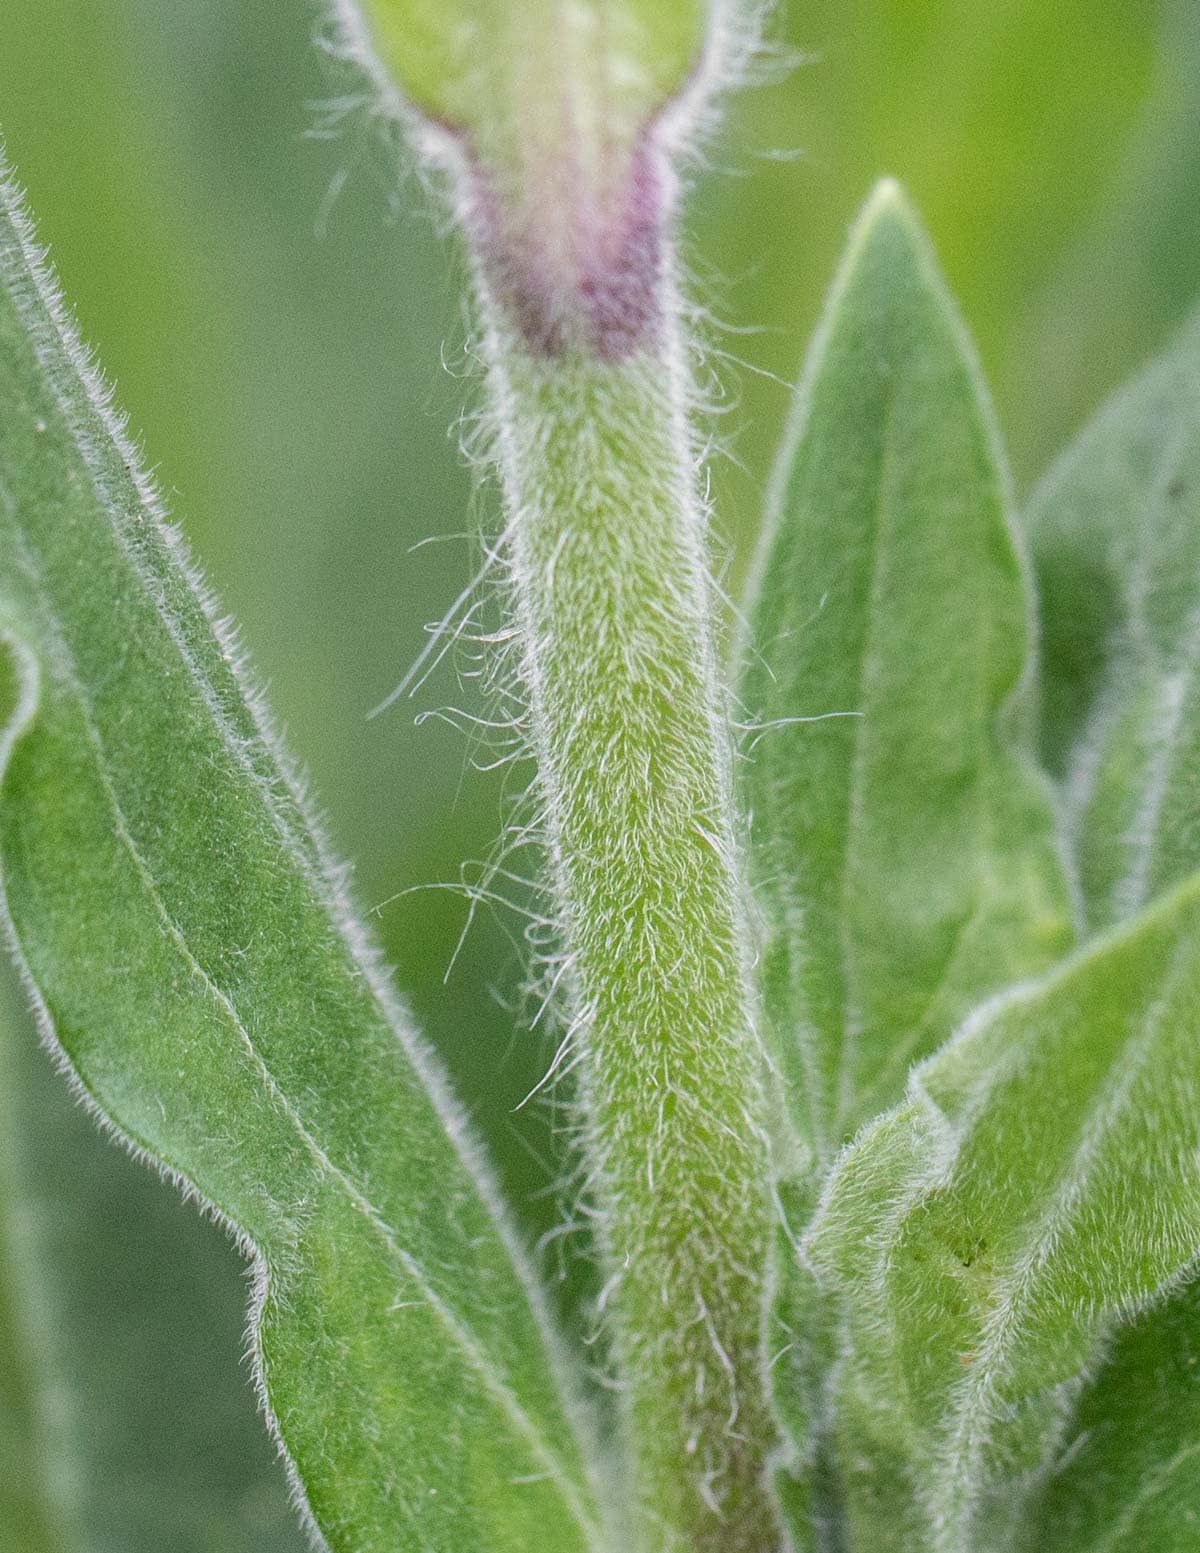 An image of white campion stems showing red coloration at the top of the node and pronounced hairy stems.